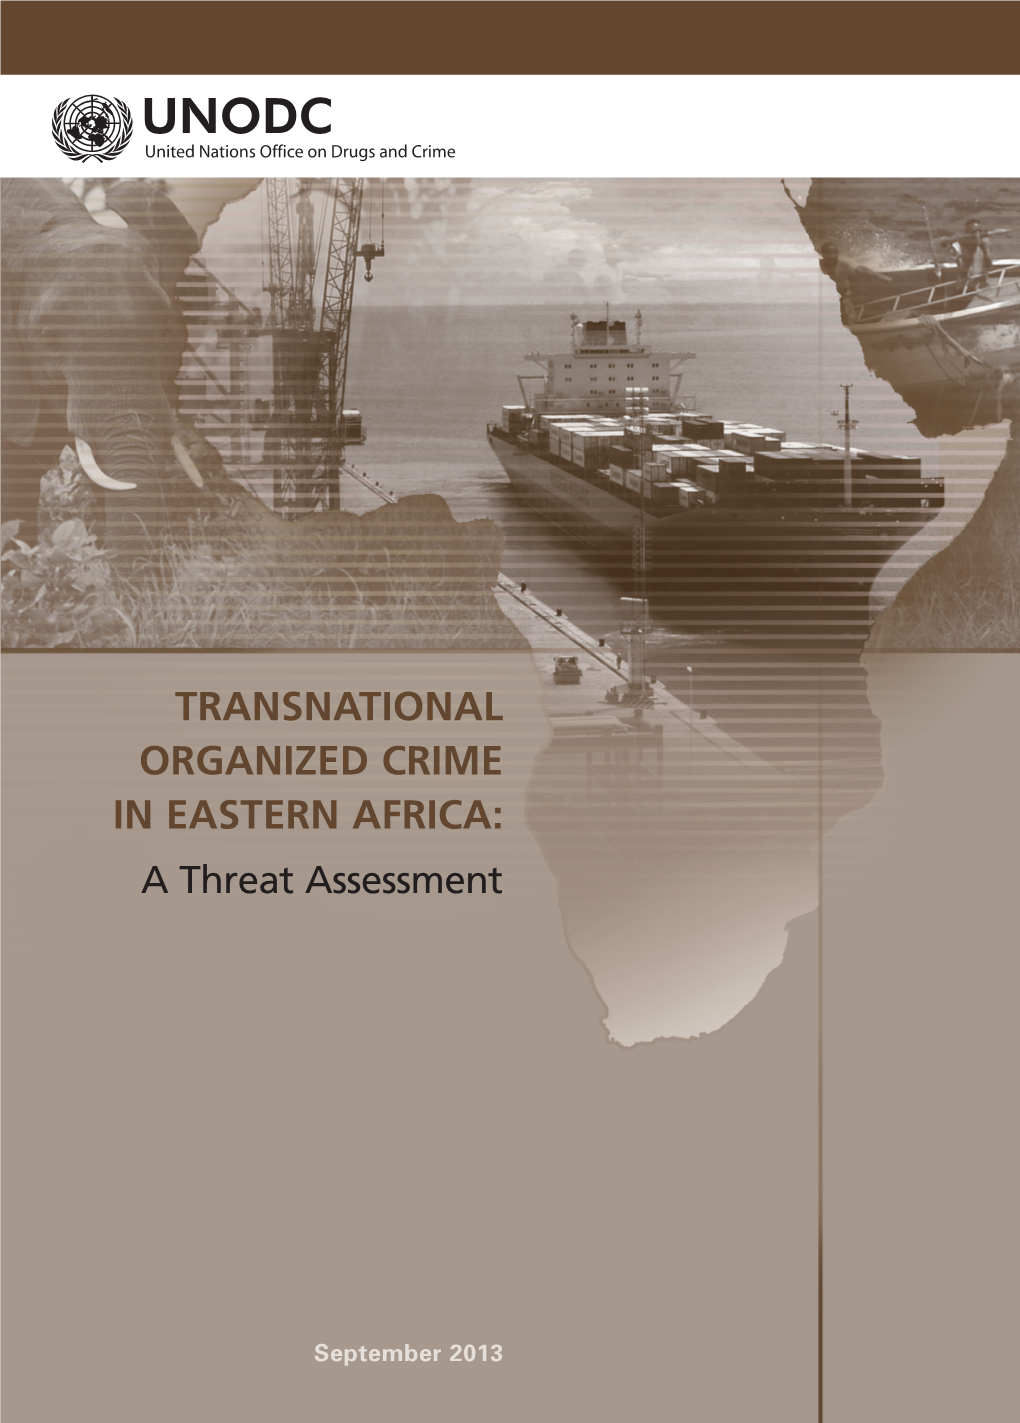 TRANSNATIONAL ORGANIZED CRIME in EASTERN AFRICA: a Threat Assessment